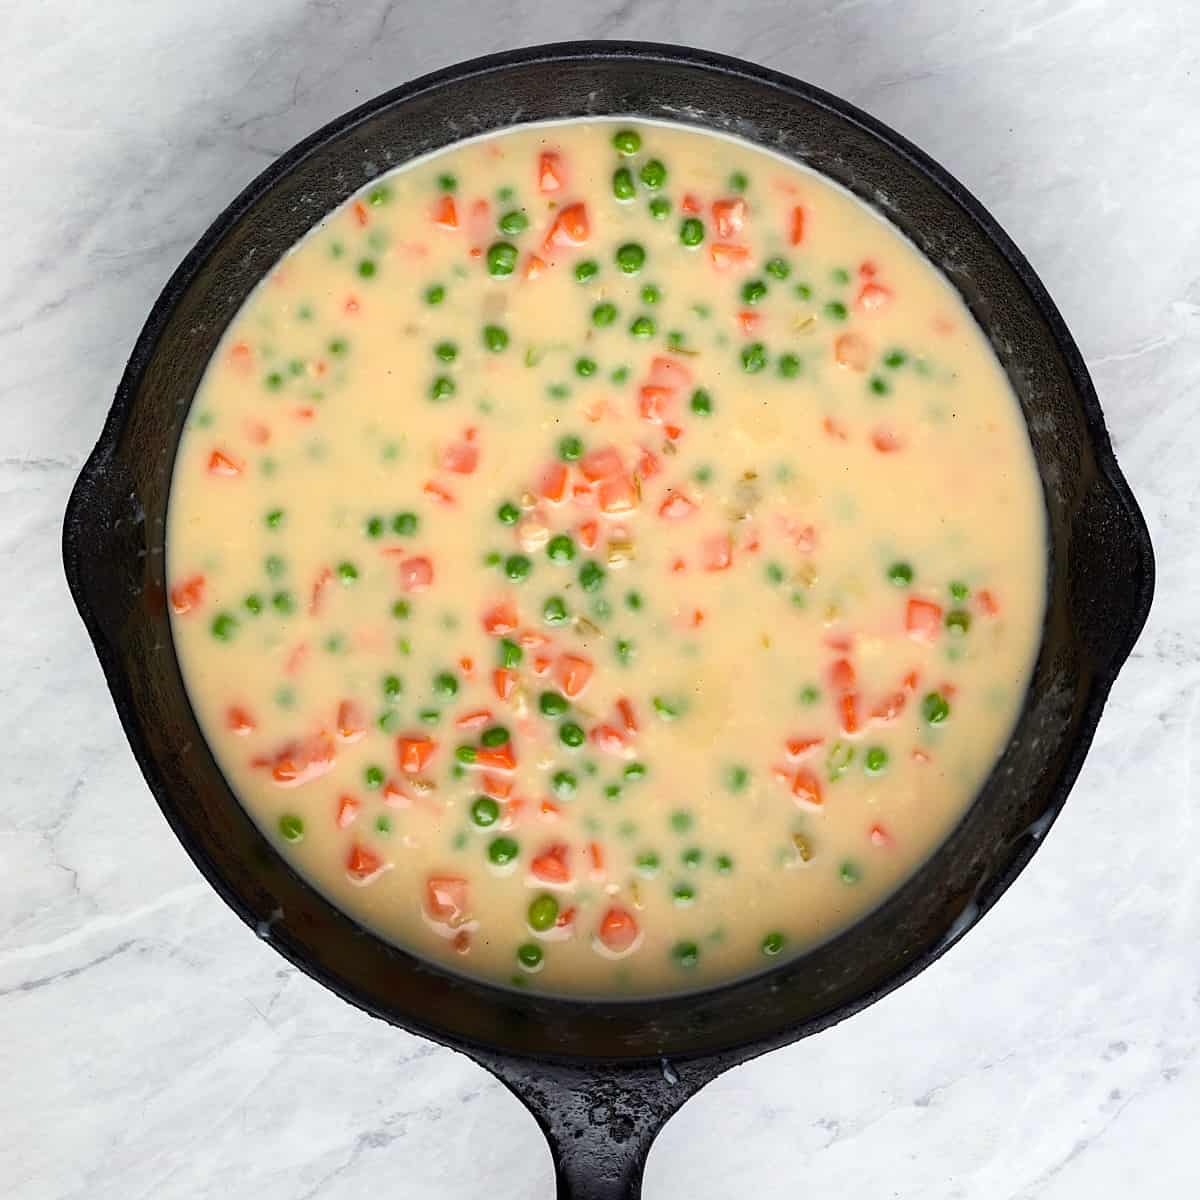 cream of celery soup, veggies, and broth cooking in a cast iron skillet.